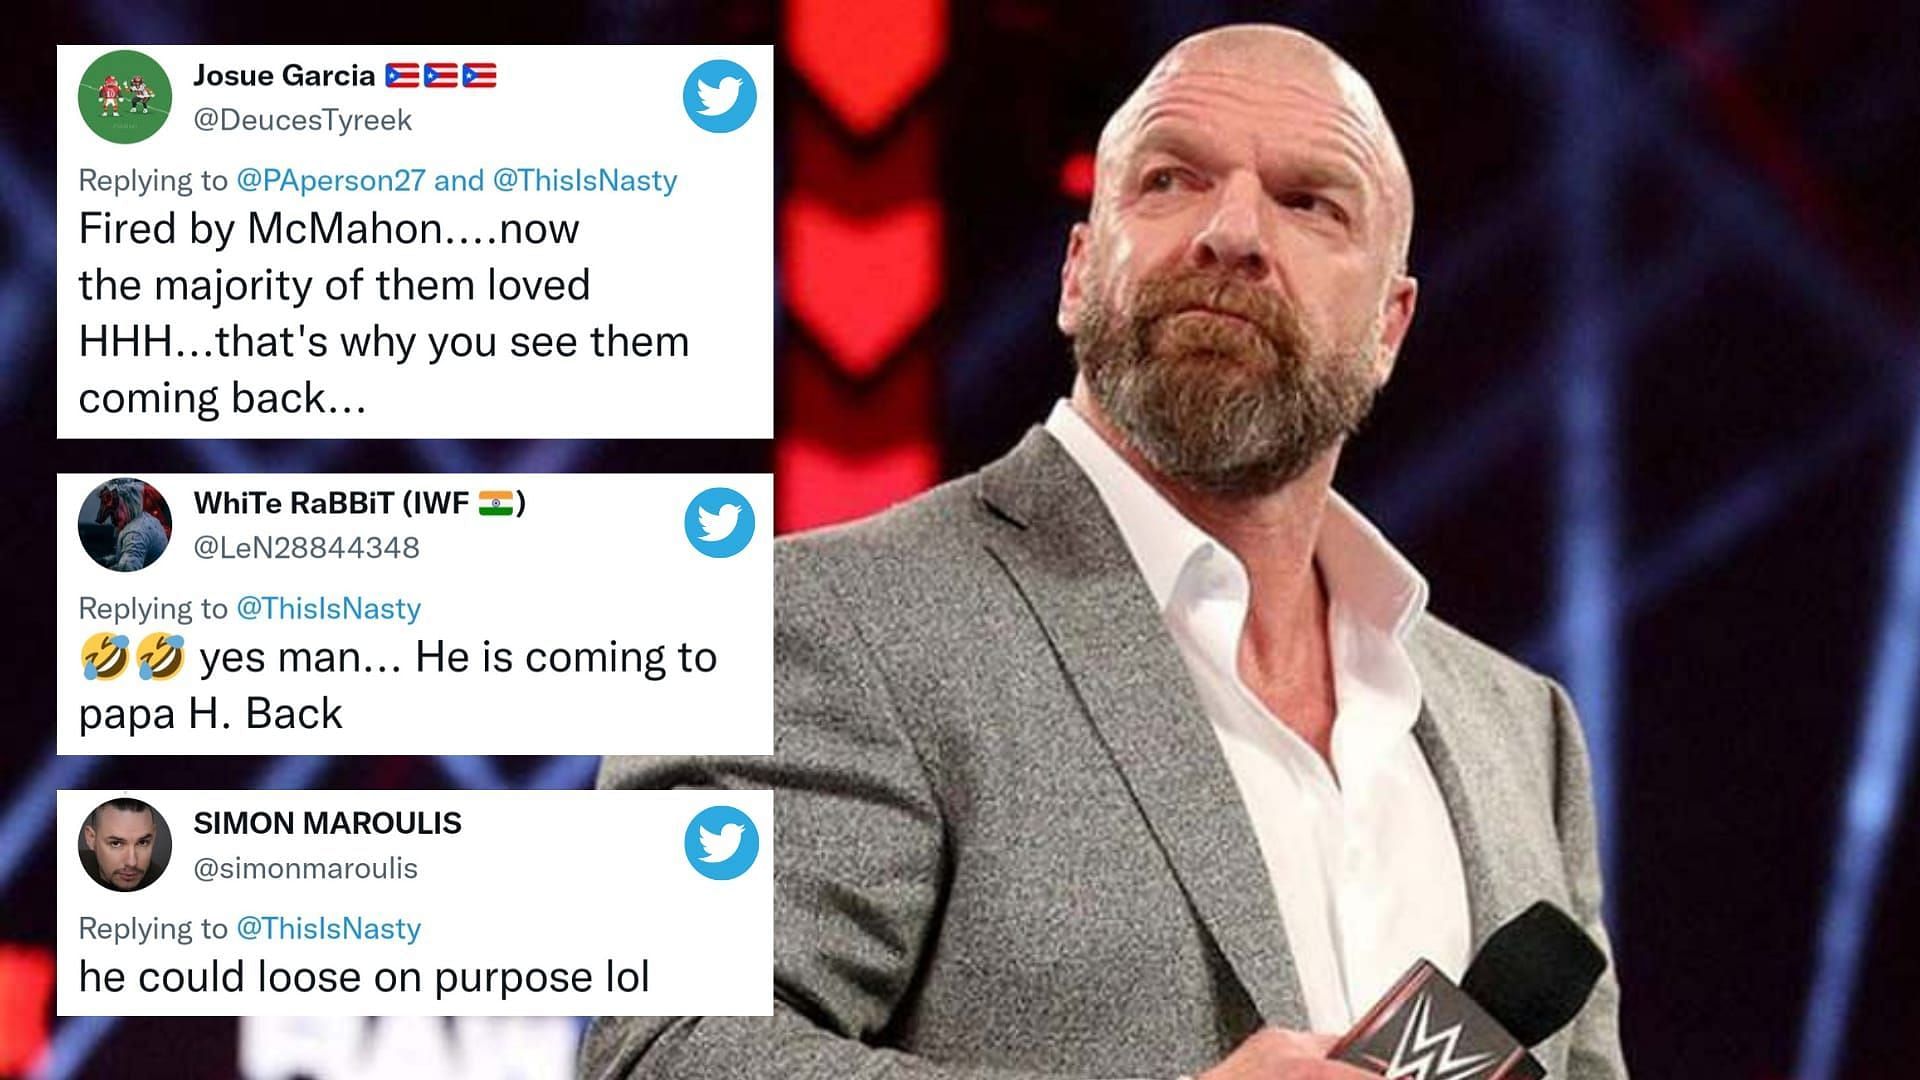 Fans want this AEW star to return to WWE under Triple H